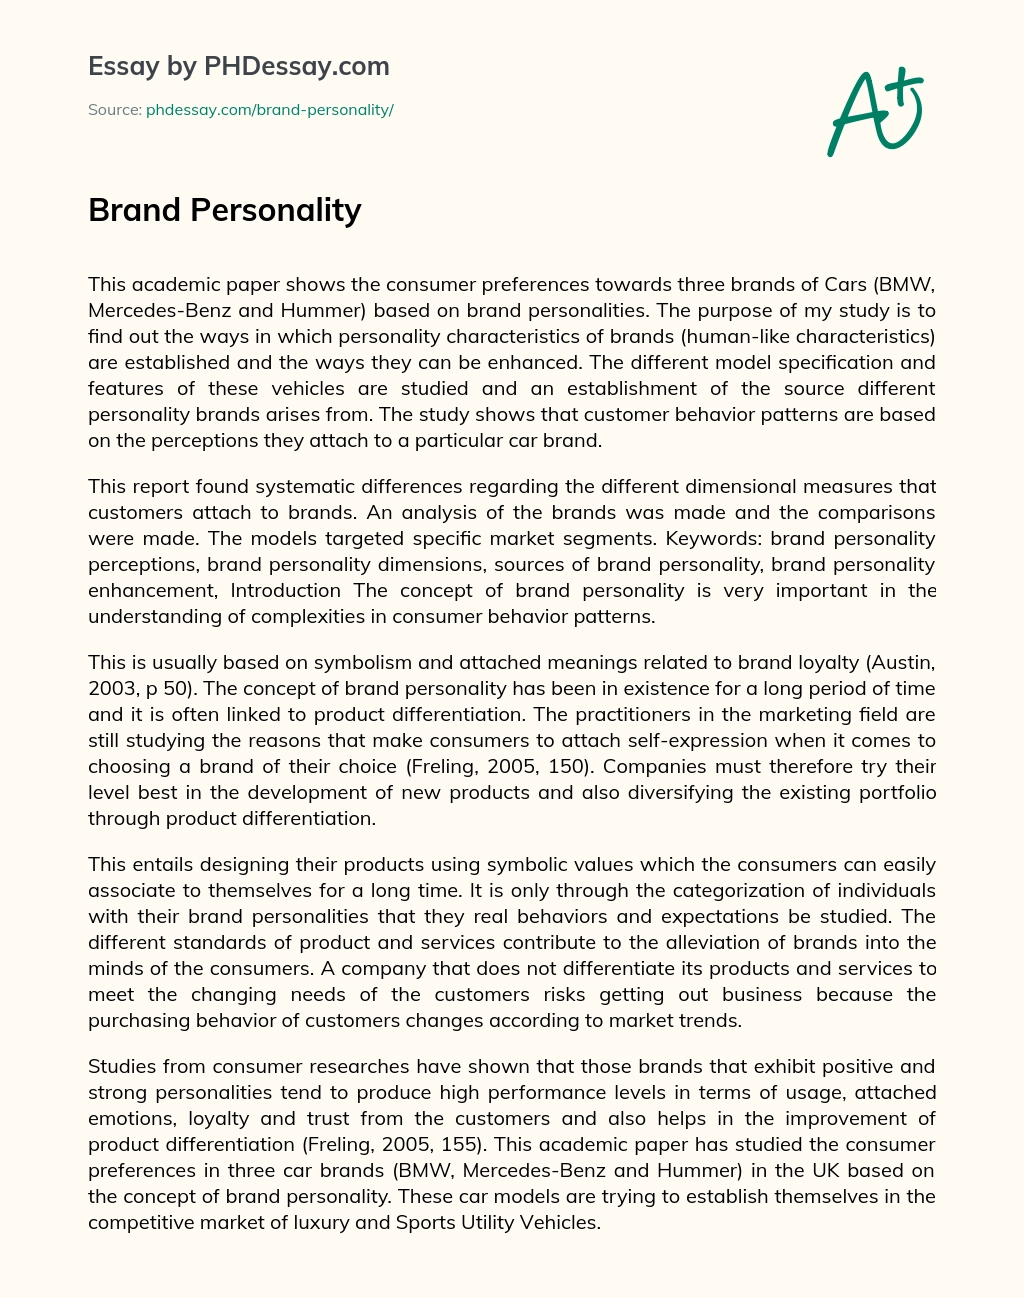 essay on brand personality